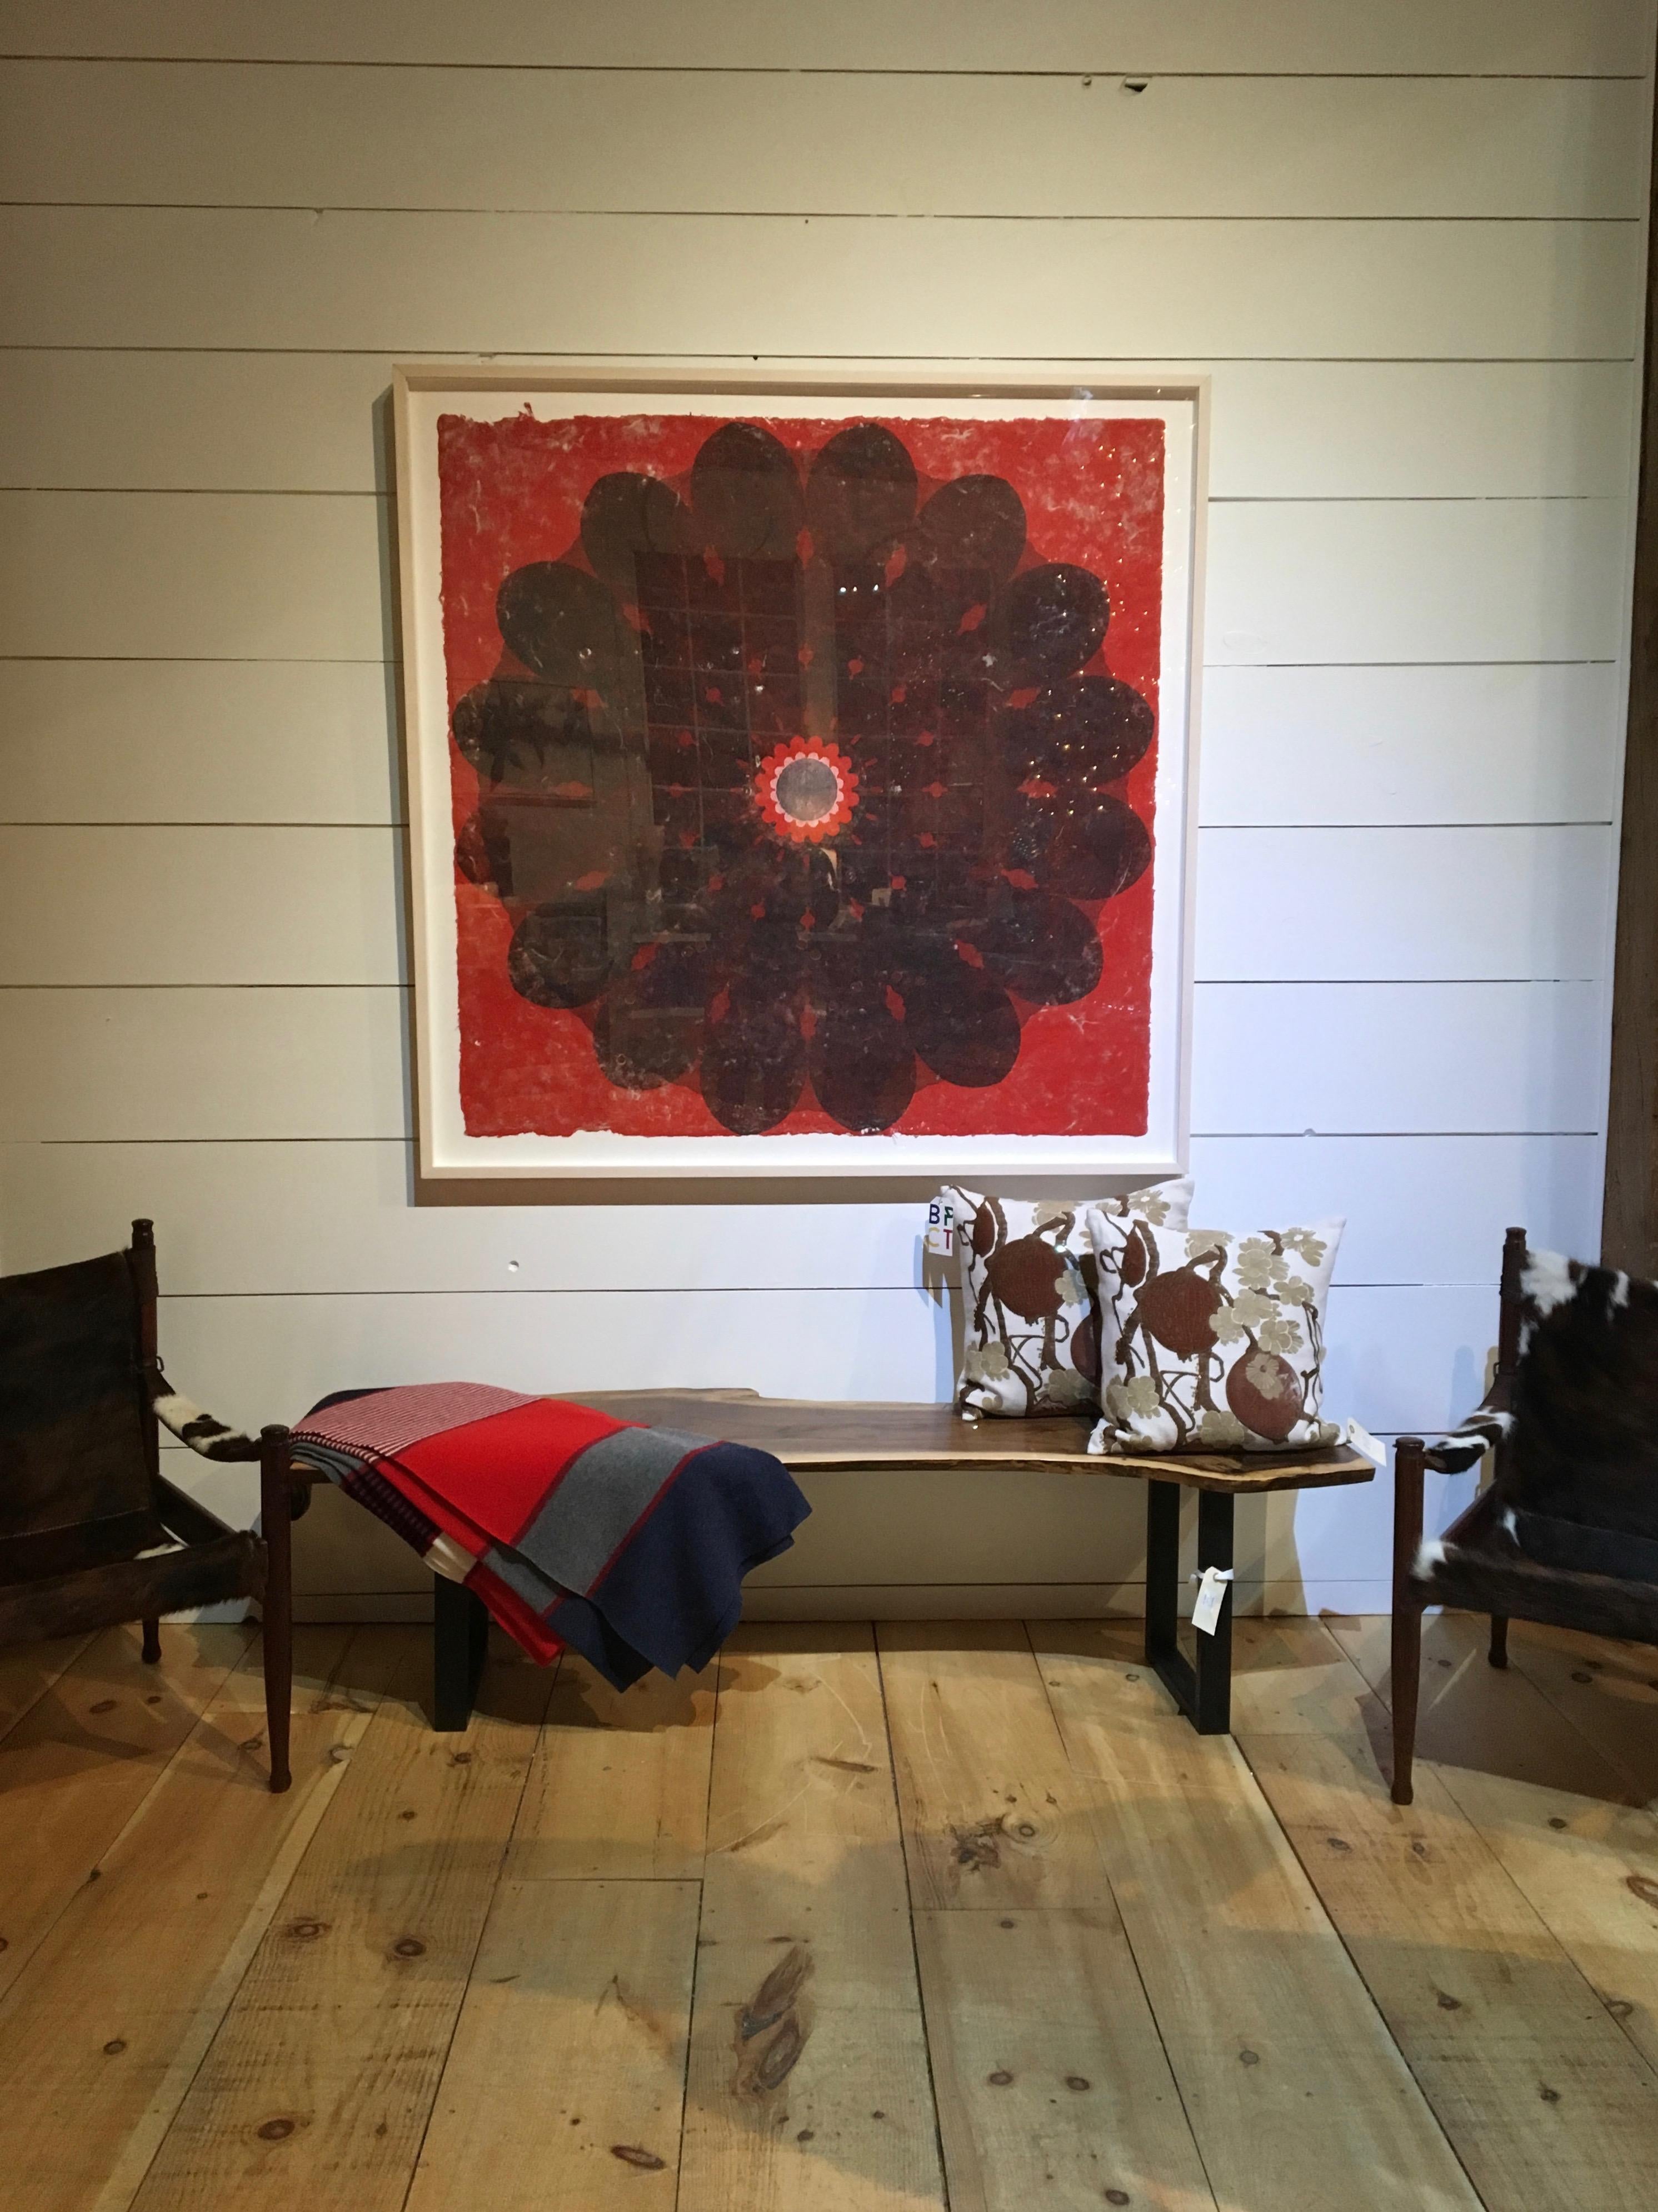 In this large, square relief print on handmade paper, a circular, botanical mandala shape with petal-like edges in dark grey is dramatic and eye-catching against the brilliant red background. A circle surrounded by smaller petal shapes is at the